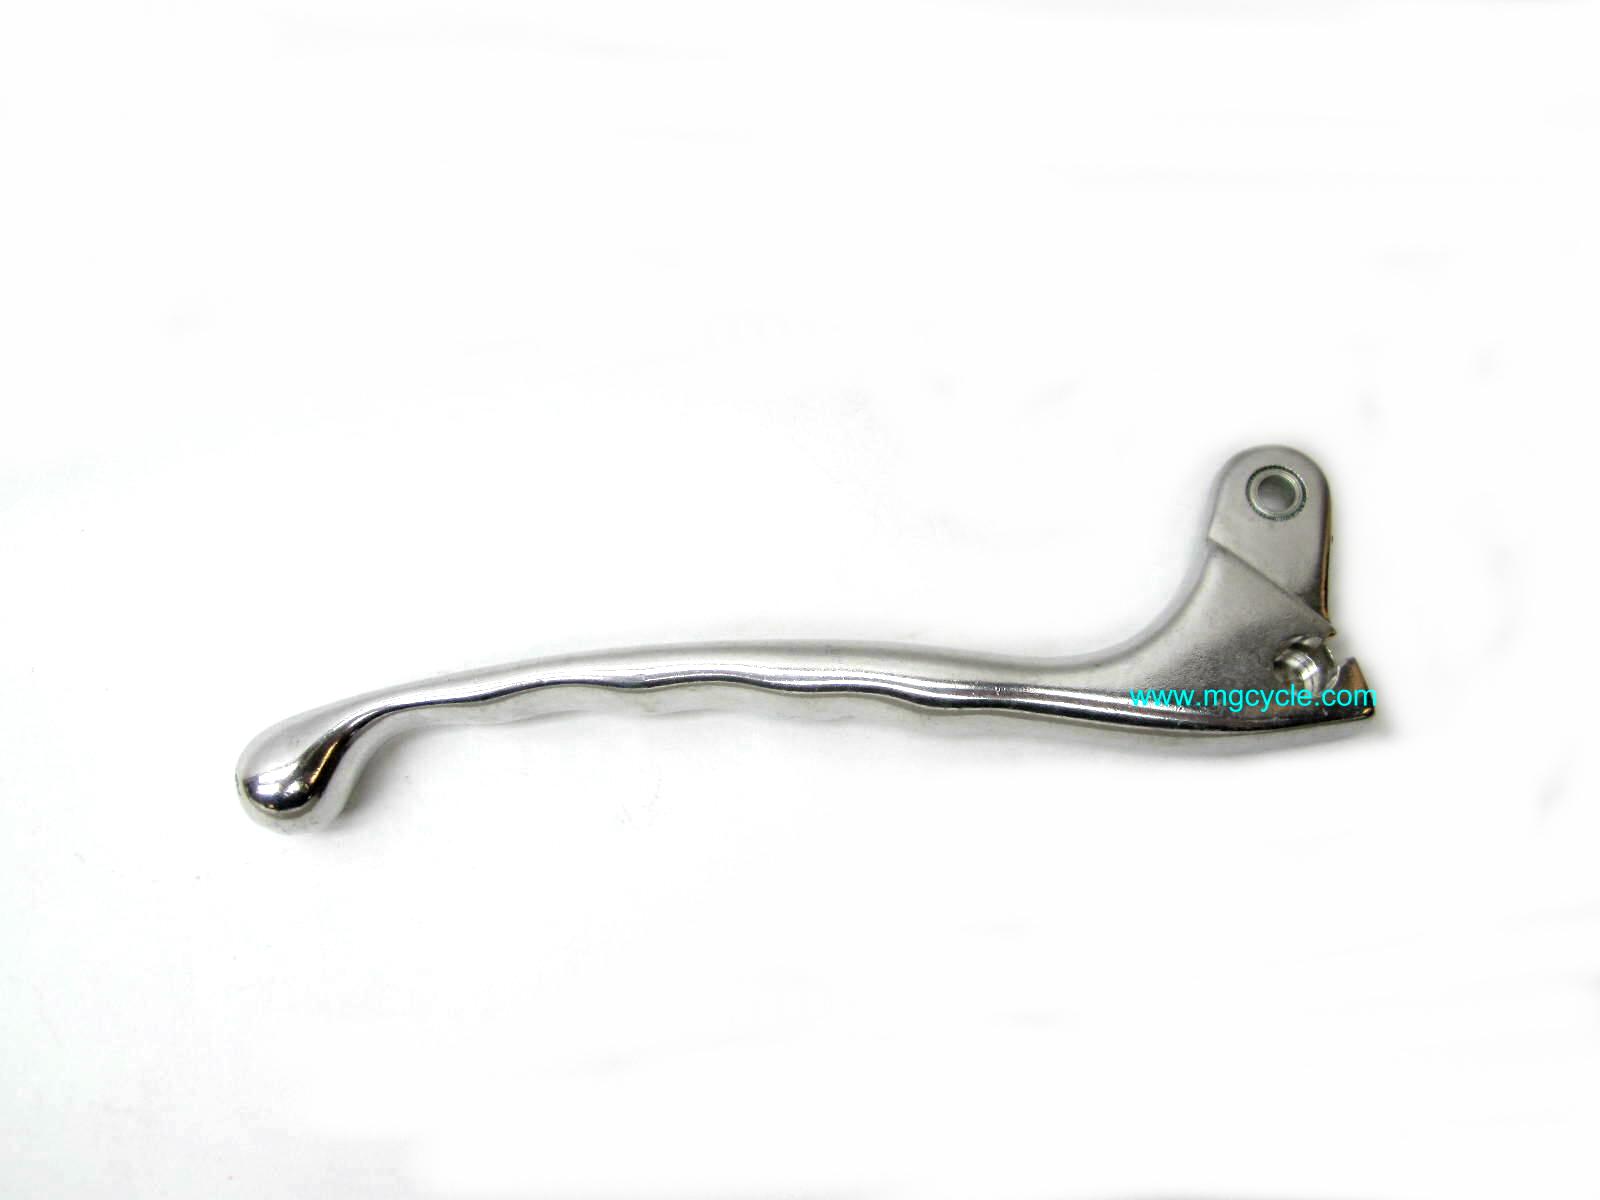 Clutch lever, polished, 850T3 Convert G5 Cal II 17605750 - Click Image to Close